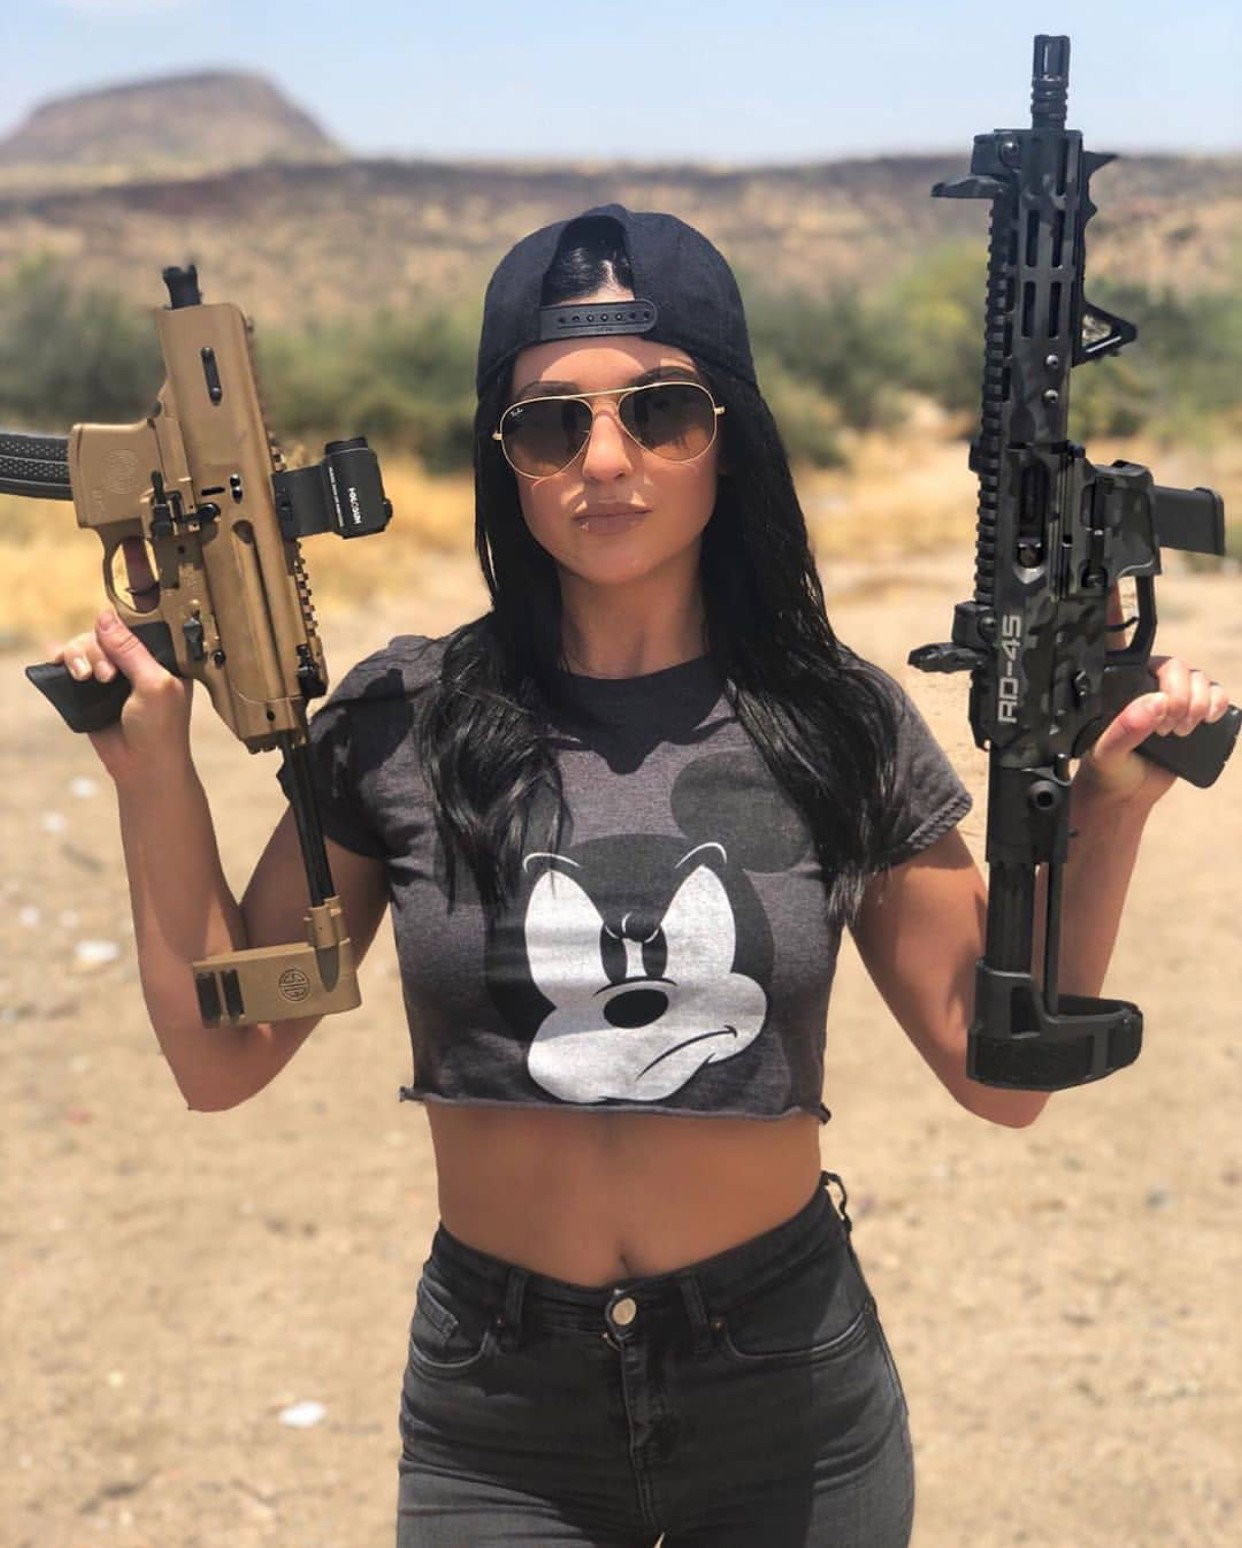 Photo by Senorpunisher with the username @Senorpunisher,  August 6, 2019 at 9:44 PM. The post is about the topic GunsNBabes